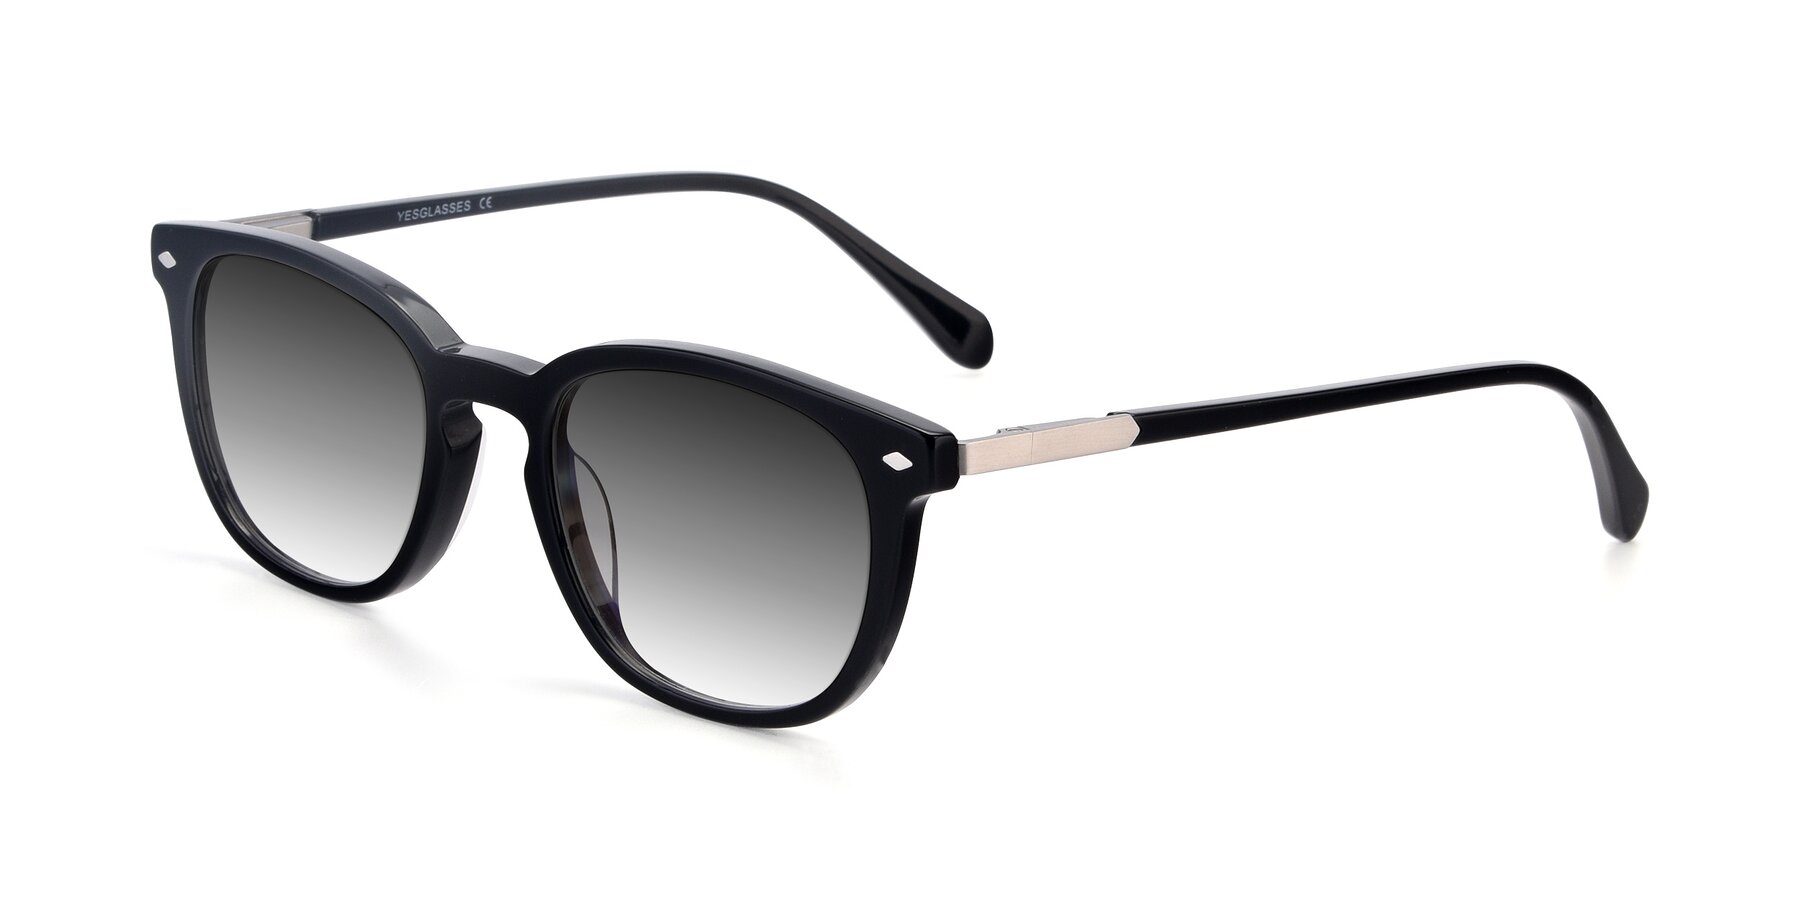 Angle of 17578 in Black with Gray Gradient Lenses